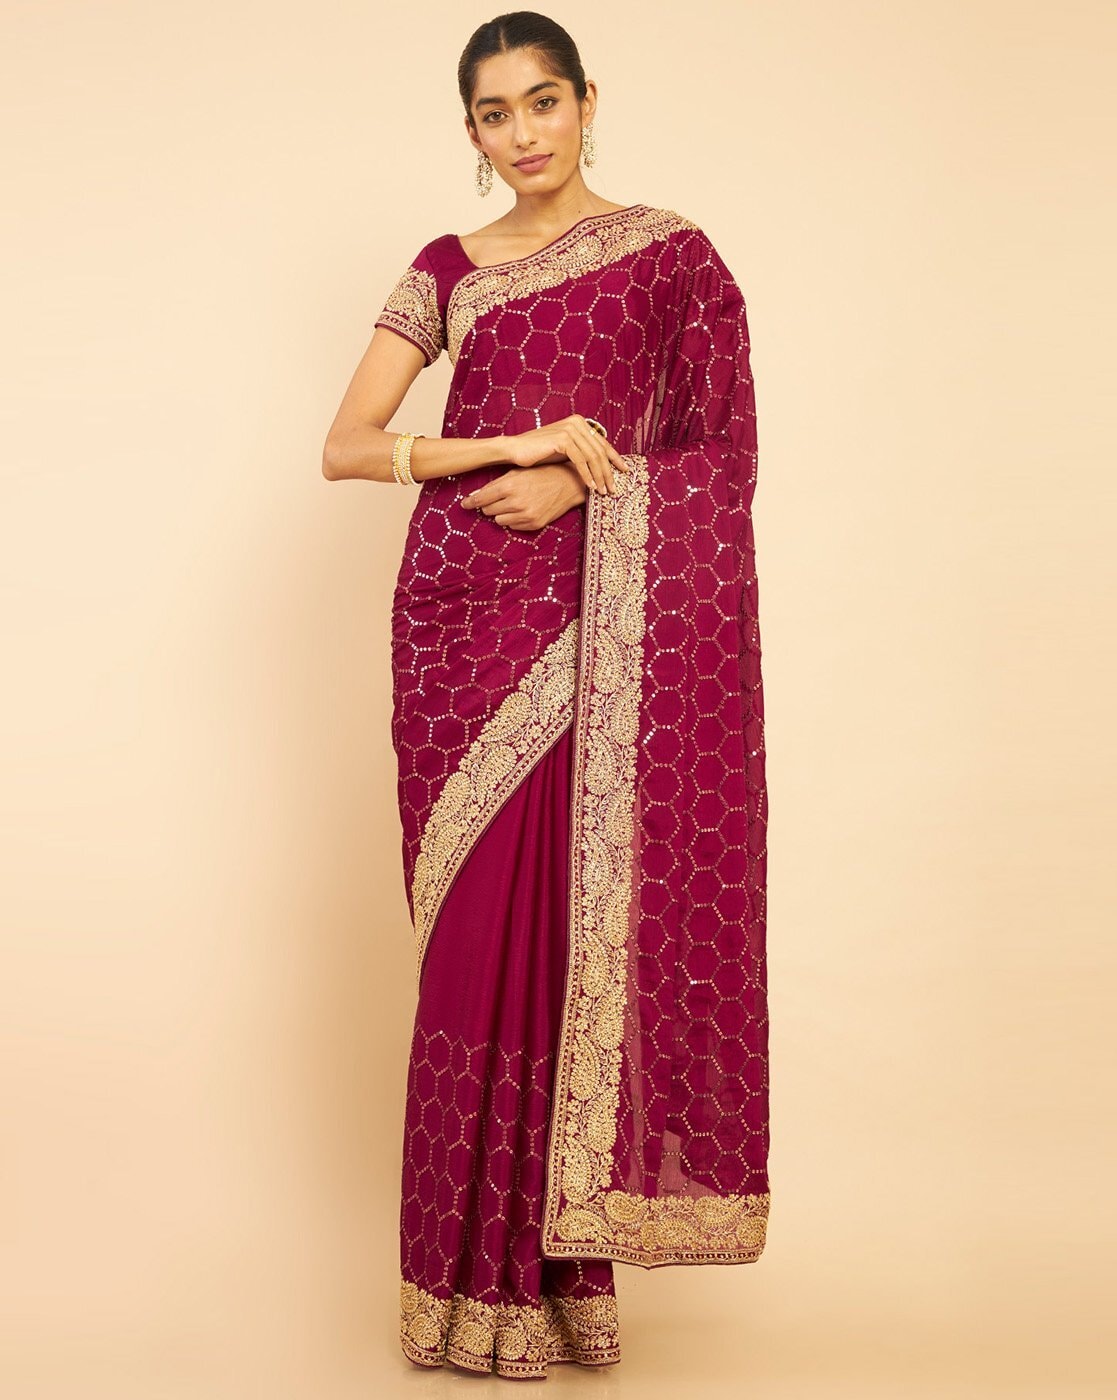 Buy Wine Chiffon Saree With Round And Oval Stone Embellished Motifs Online  at Soch India